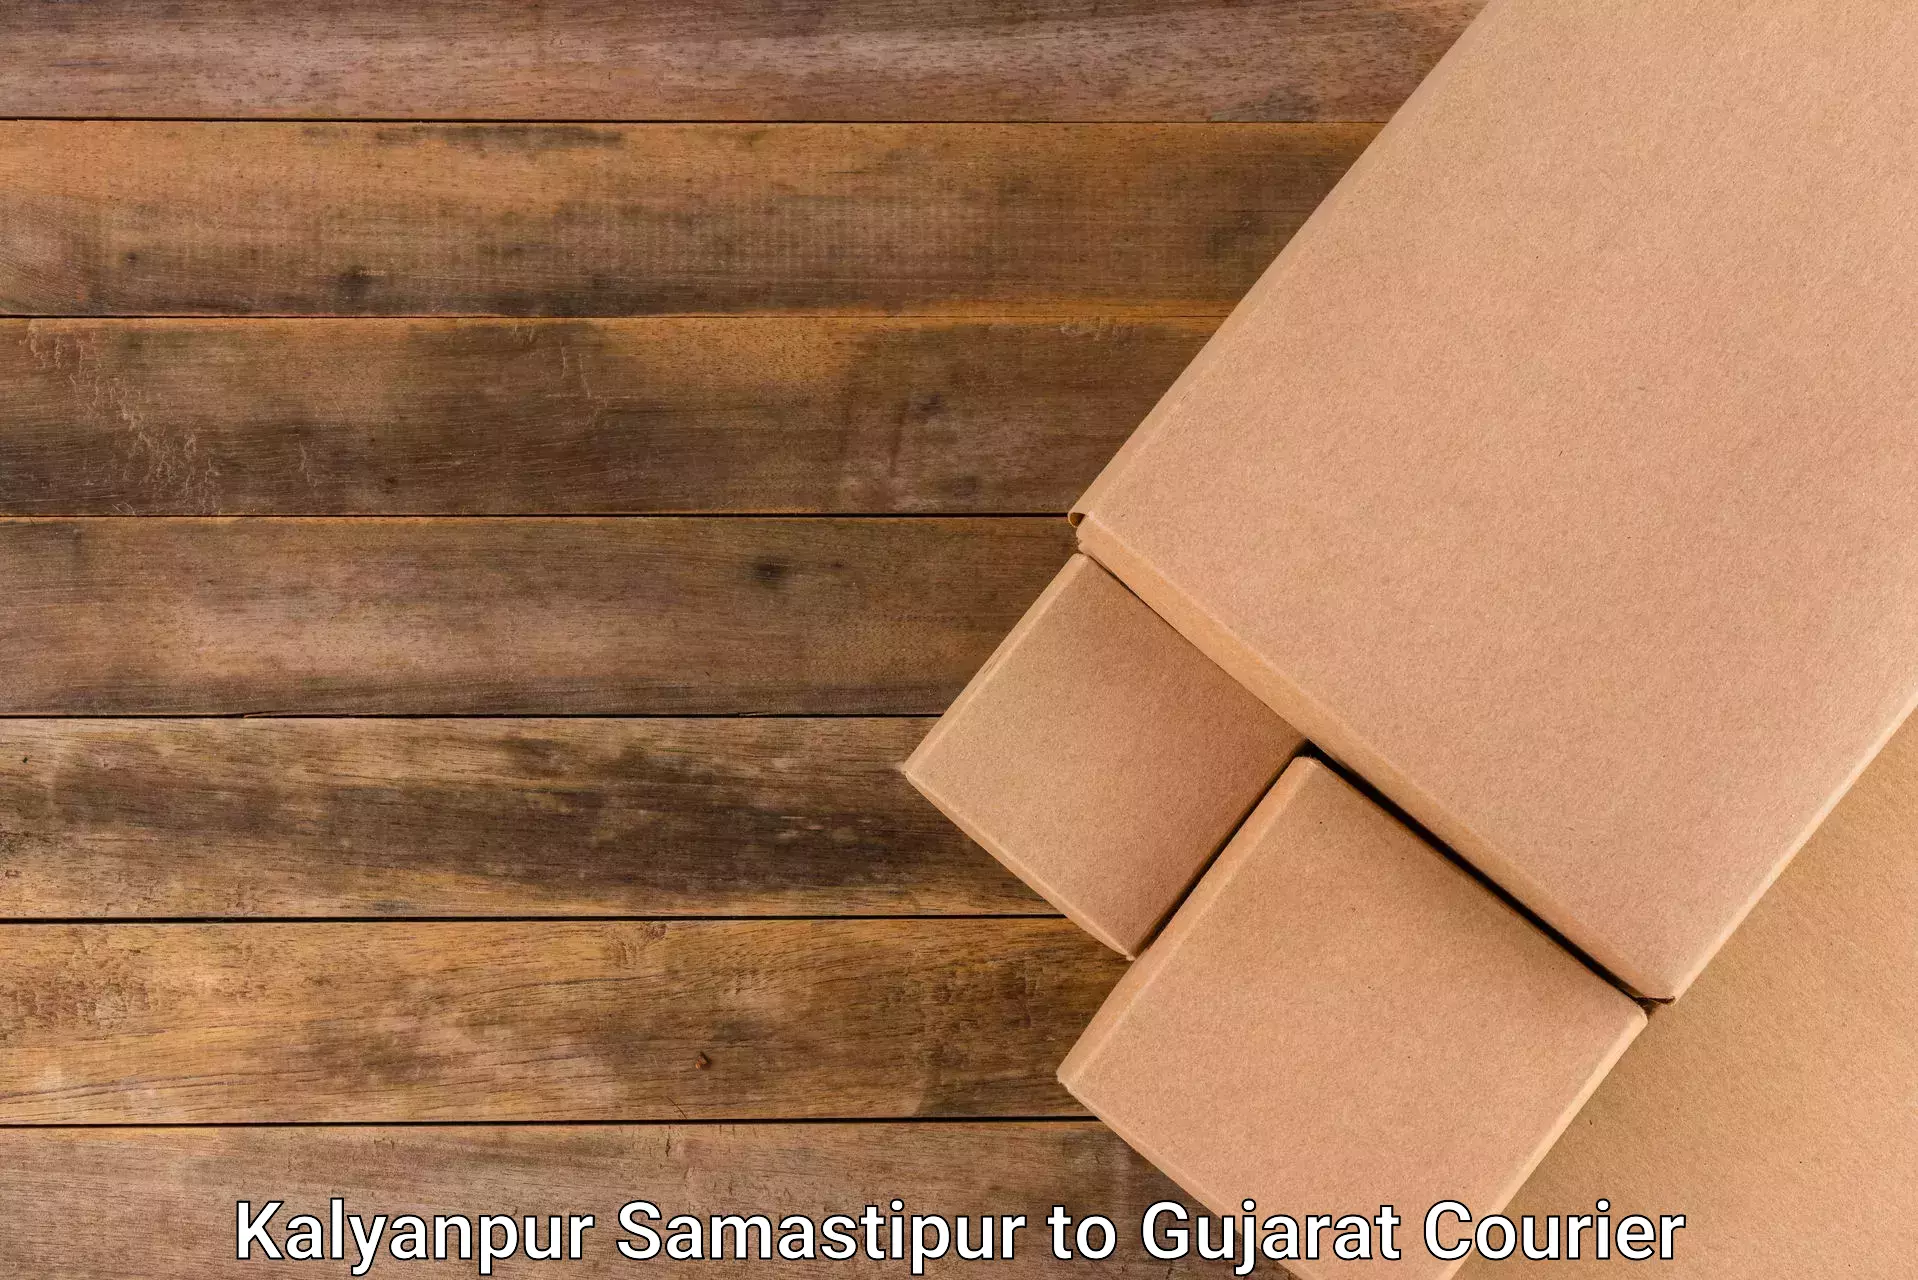 Flexible delivery schedules Kalyanpur Samastipur to Rajkot